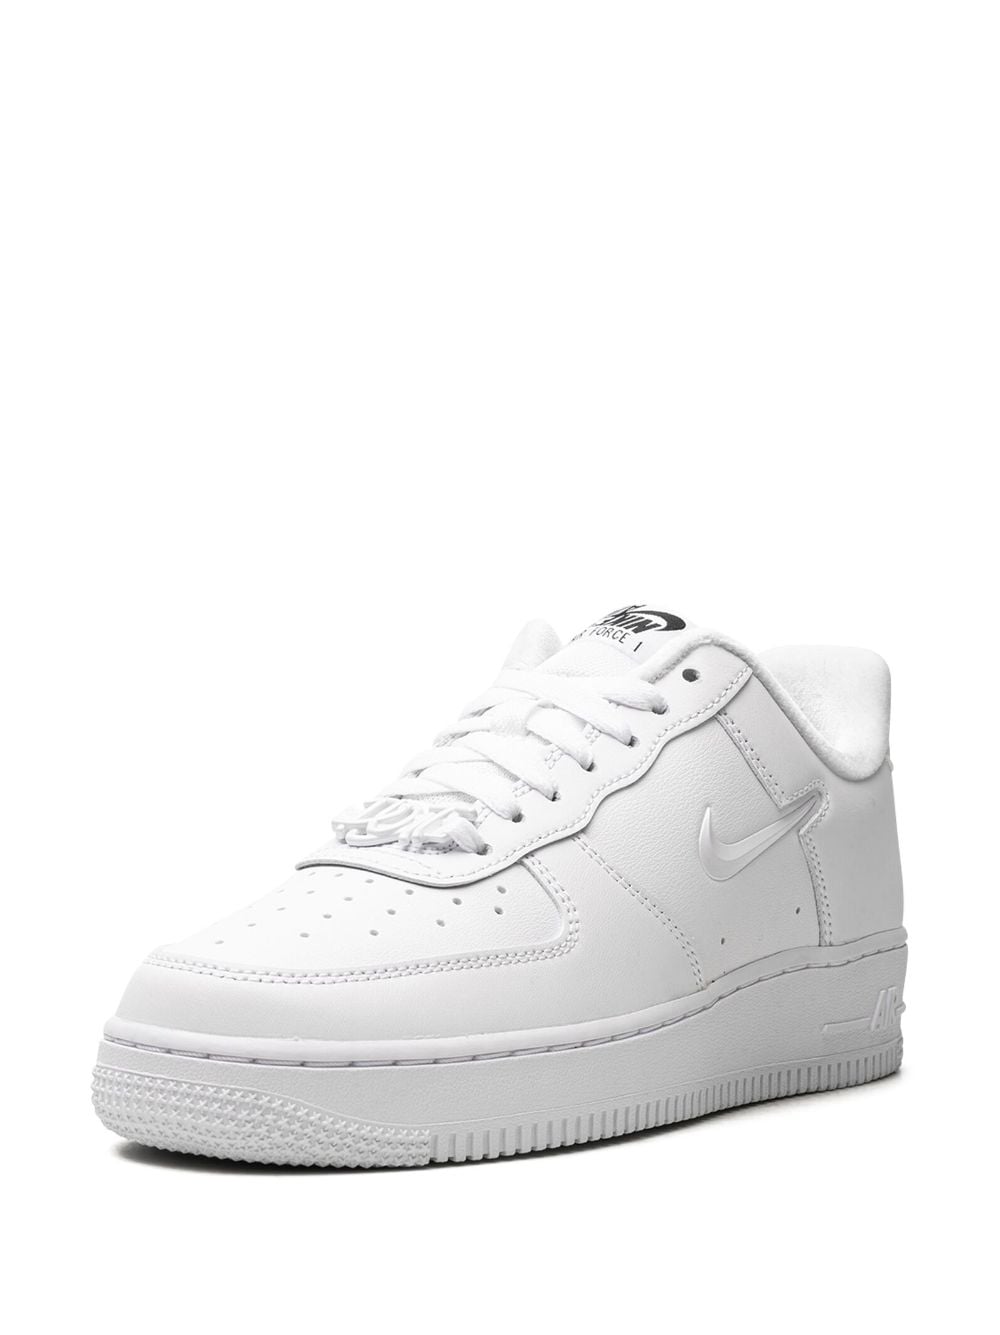 Shop Nike Air Force 1 '07 Leather Sneakers In Weiss